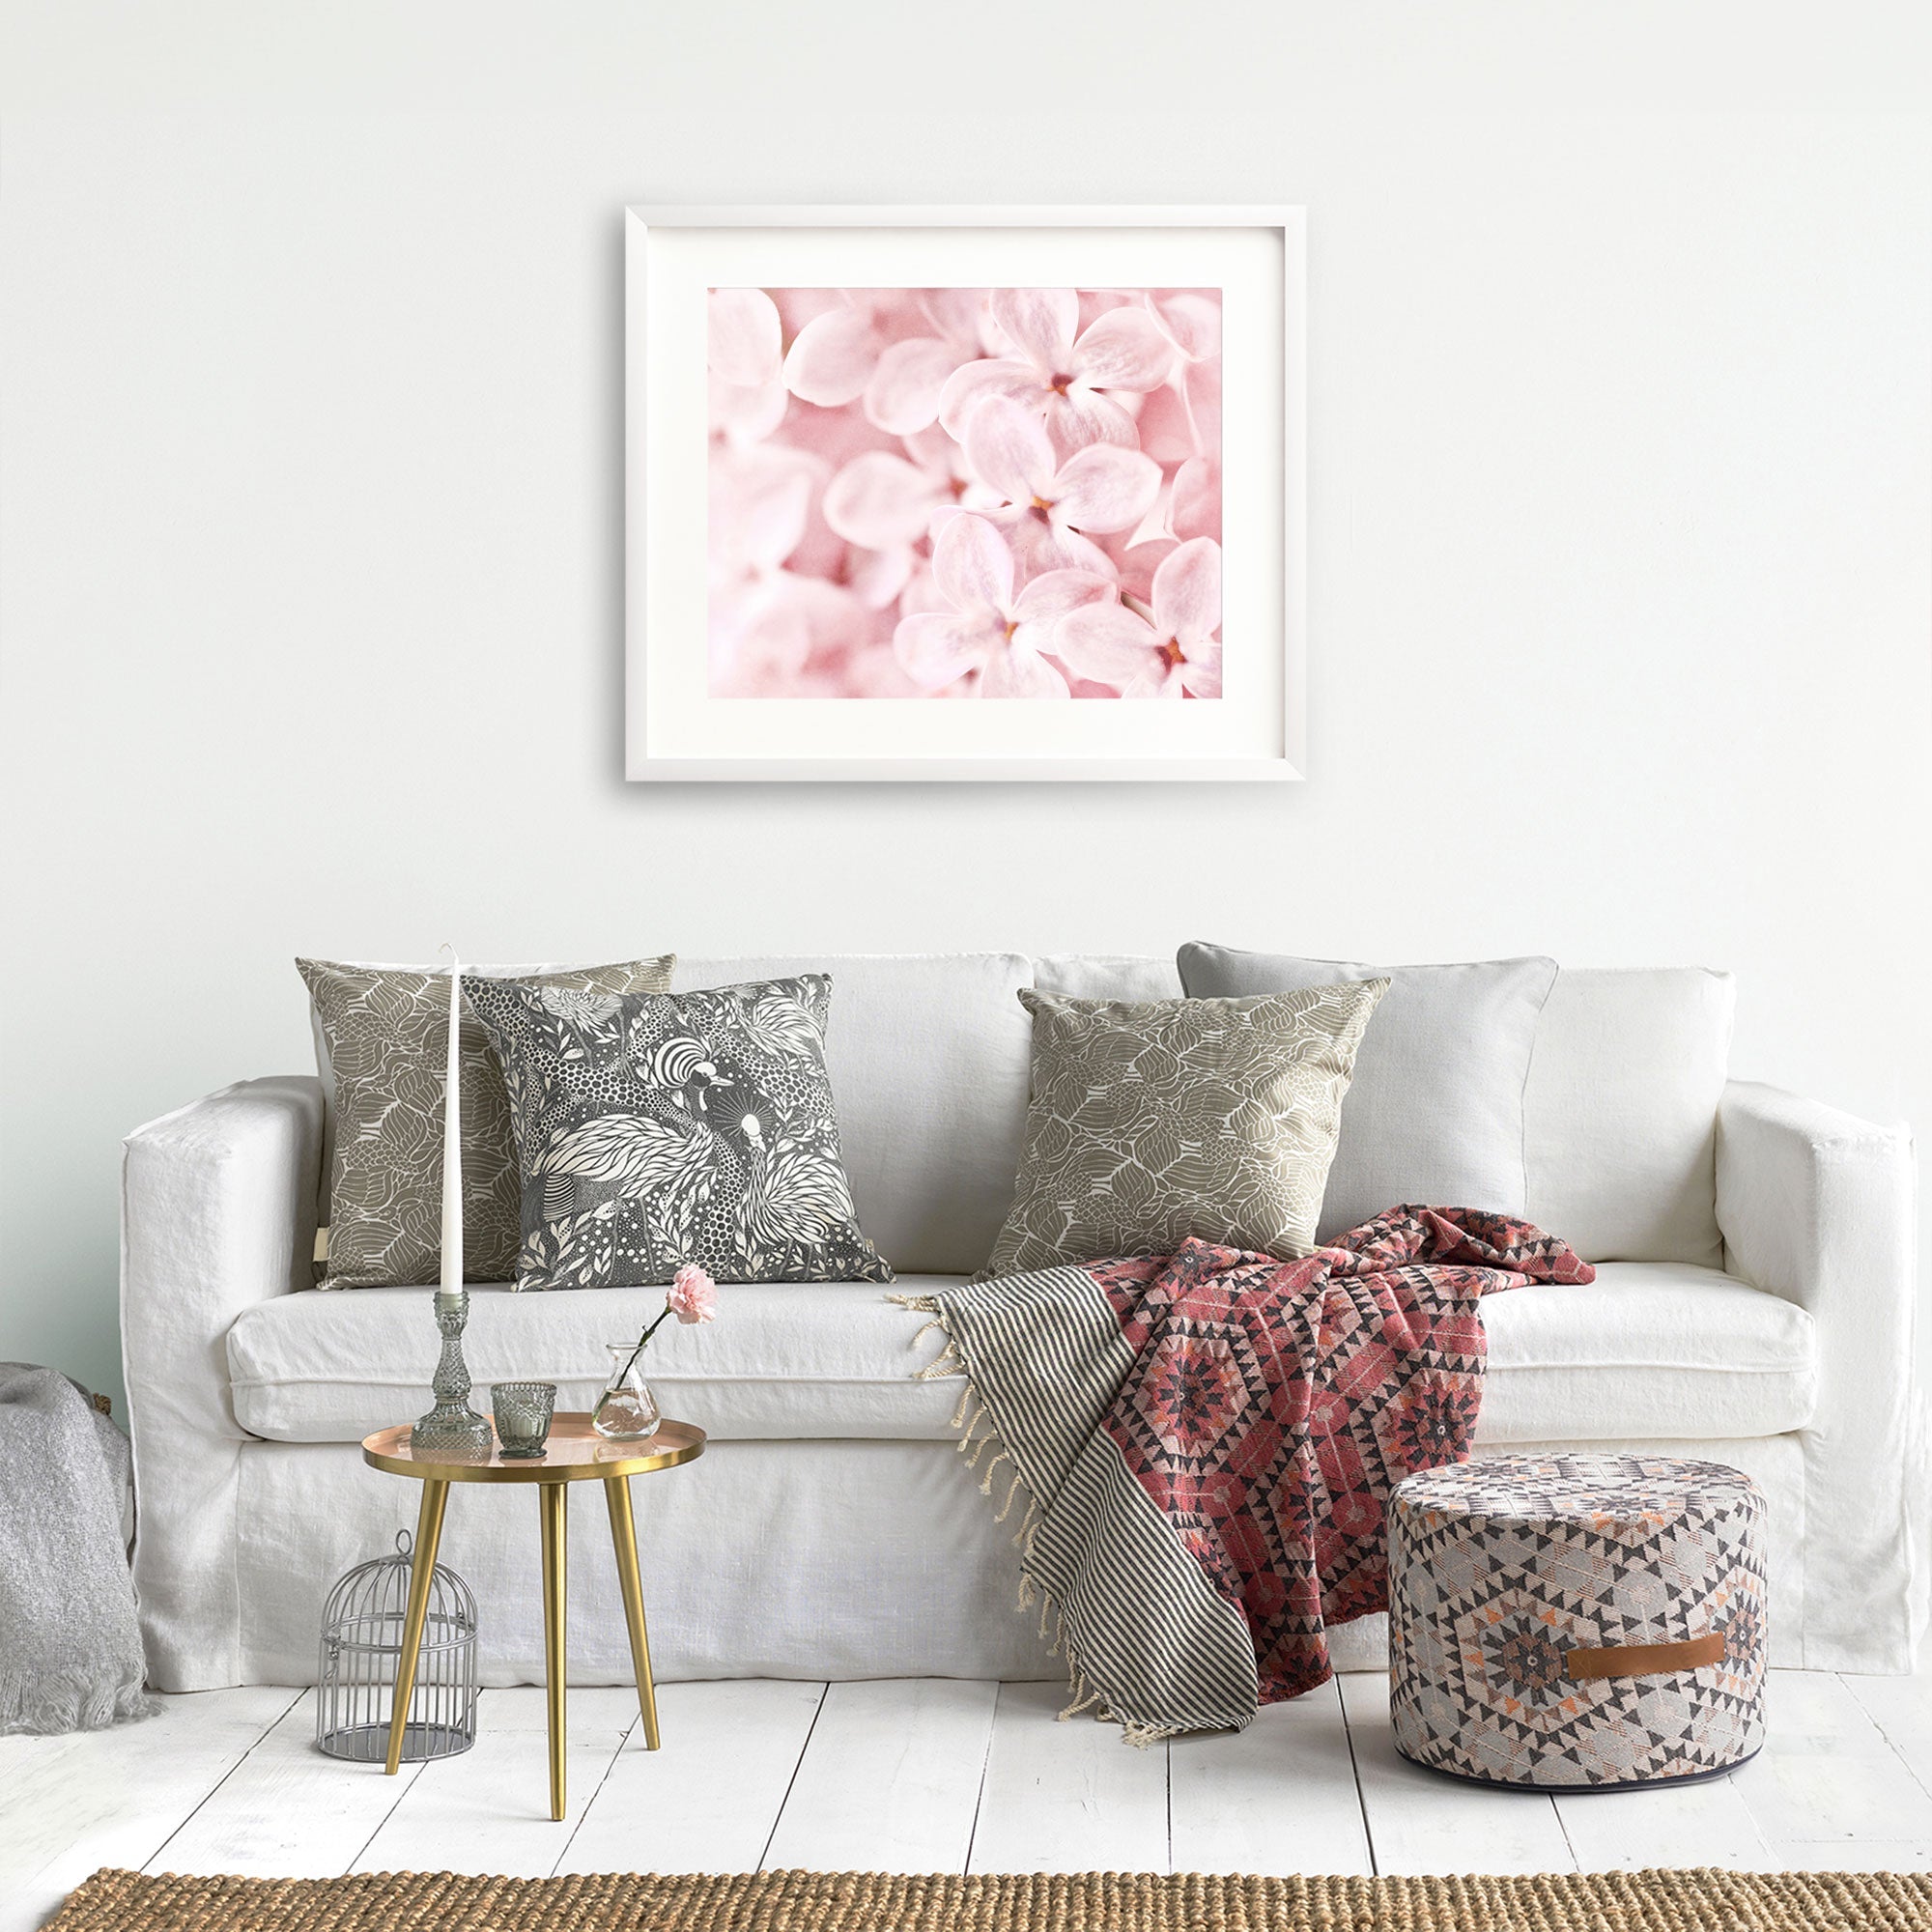 A cozy living room setup with a white sofa adorned with various patterned cushions, a knit throw blanket, and a small golden side table with decorative items, under Offley Green&#39;s Pink Botanical Print, &#39;Bed of Lilacs&#39;.